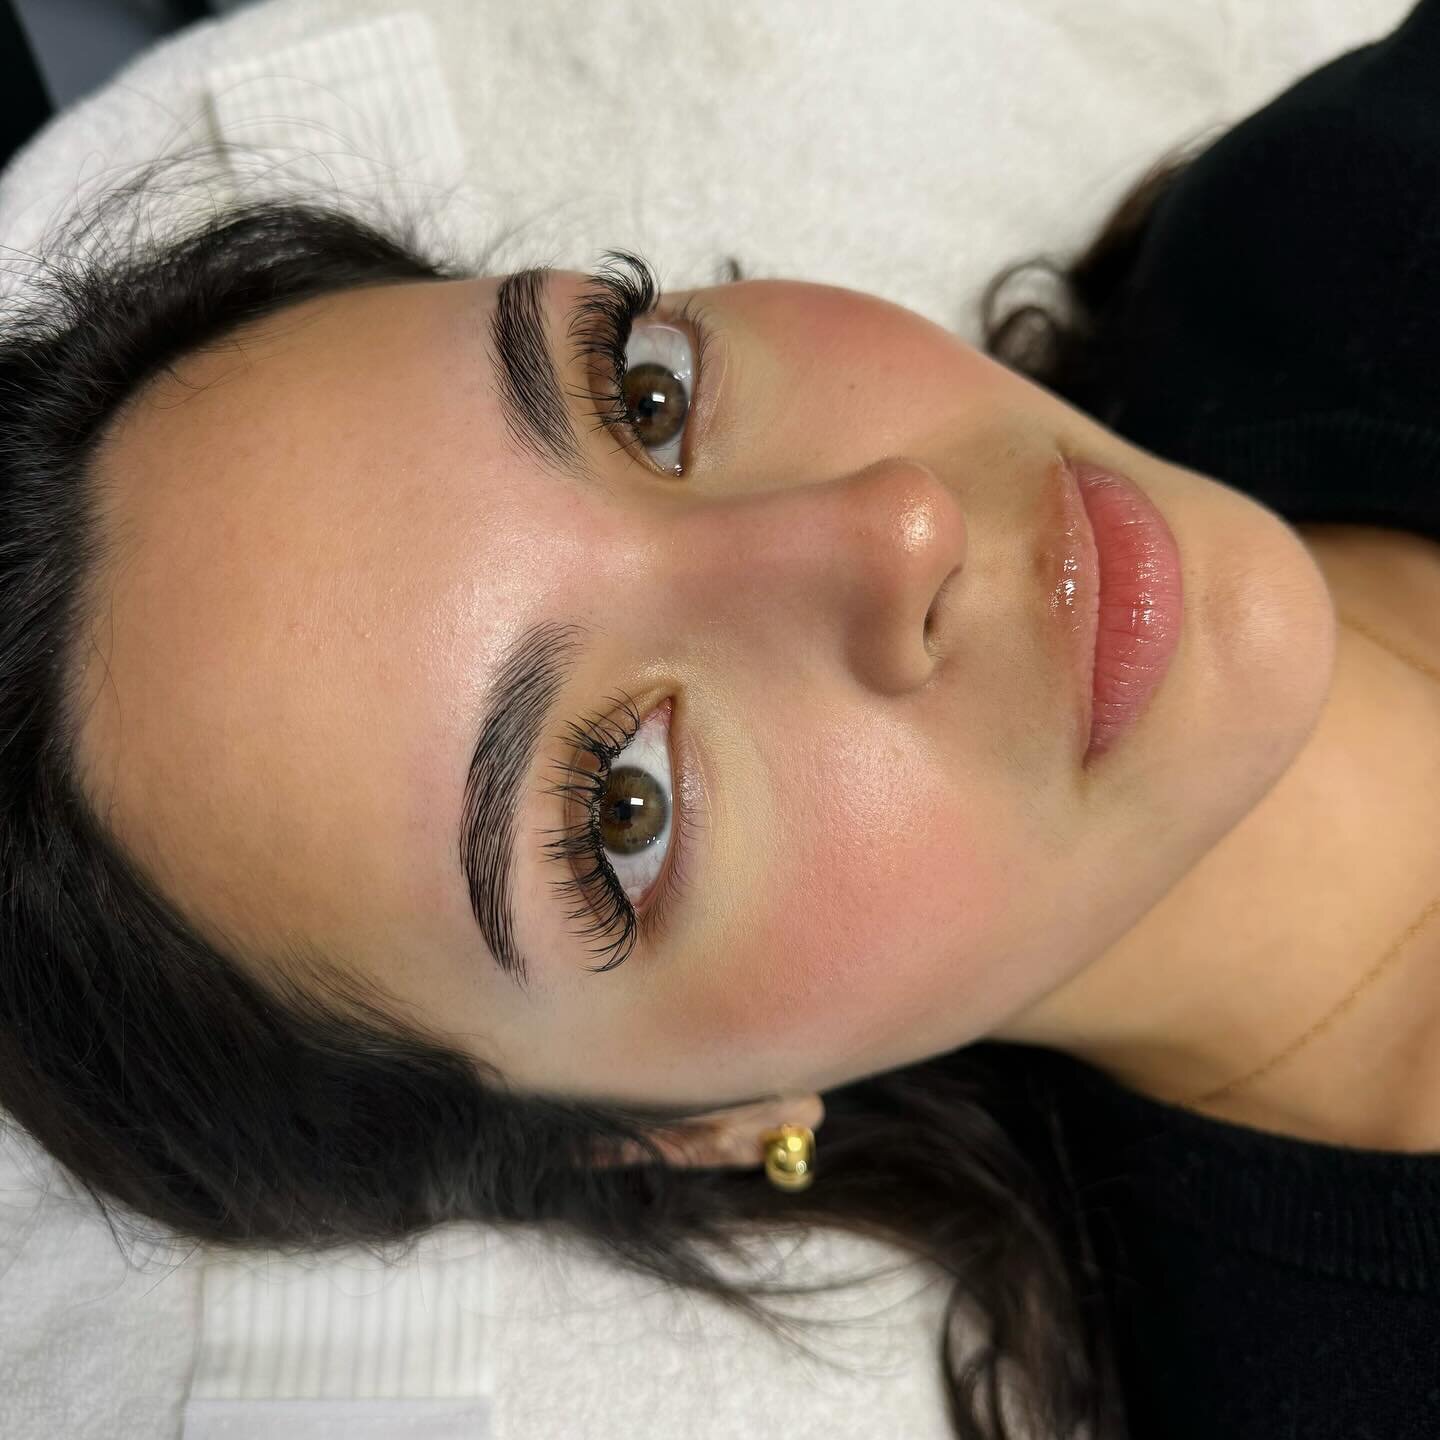 Brow Lami in this beauty by the amazing @brooklyn.esthetician ✨👏

Schedule an appointment with one of our students by giving us a call 👇
737-777-9434